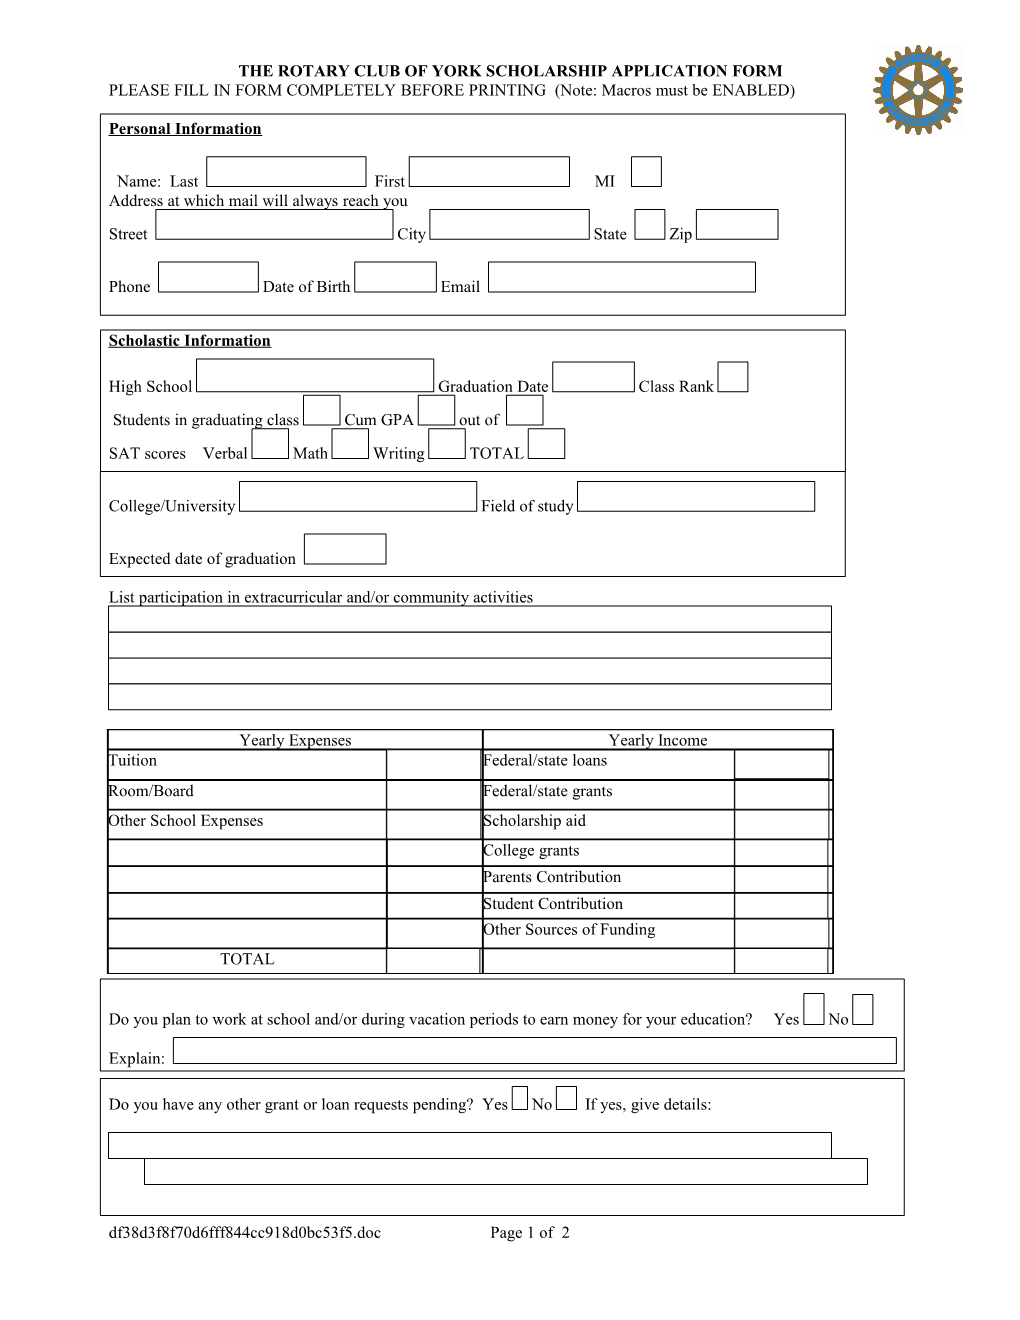 PLEASE FILL in FORM COMPLETELY BEFORE PRINTING (Note: Macros Must Be ENABLED)